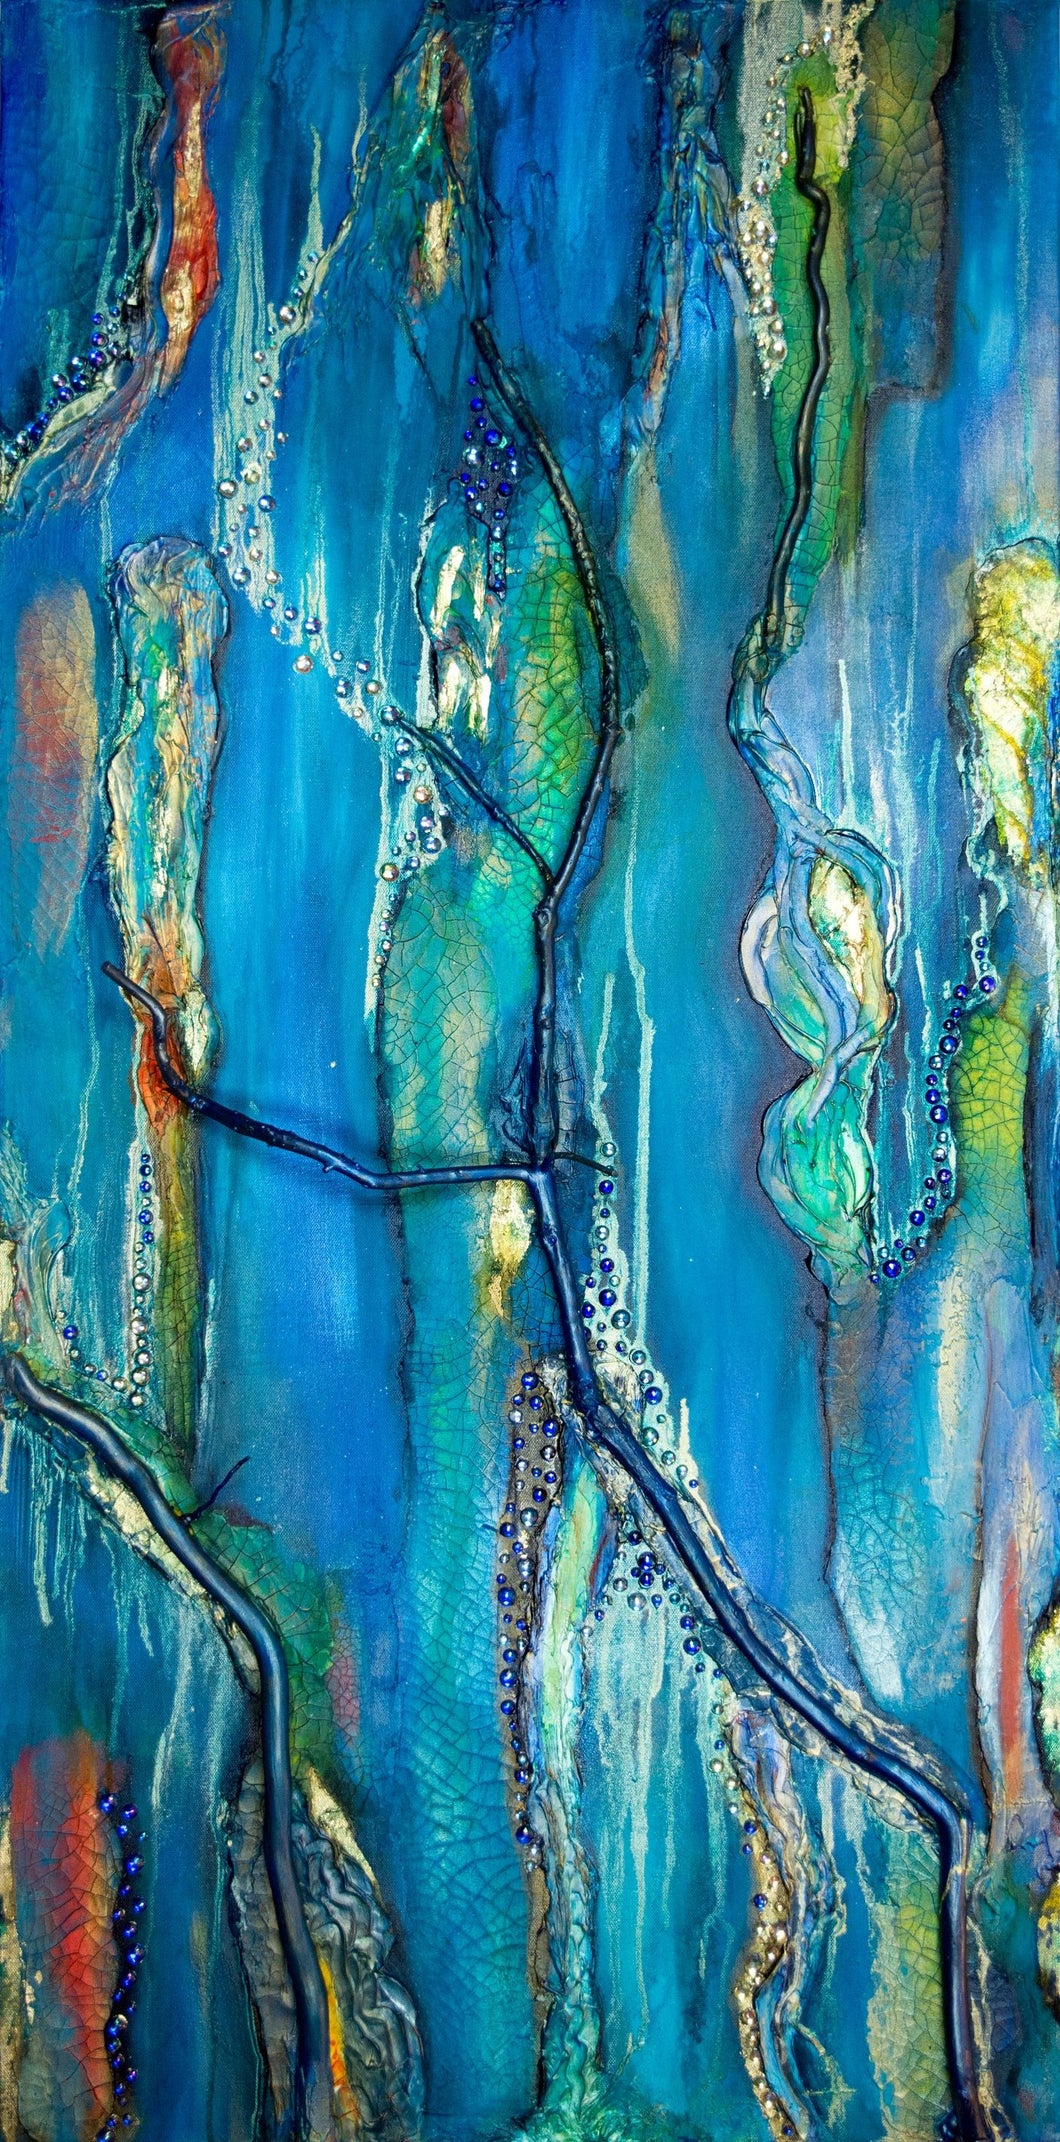 vibrant blue abstract textured acrylic ink painting with natural branches